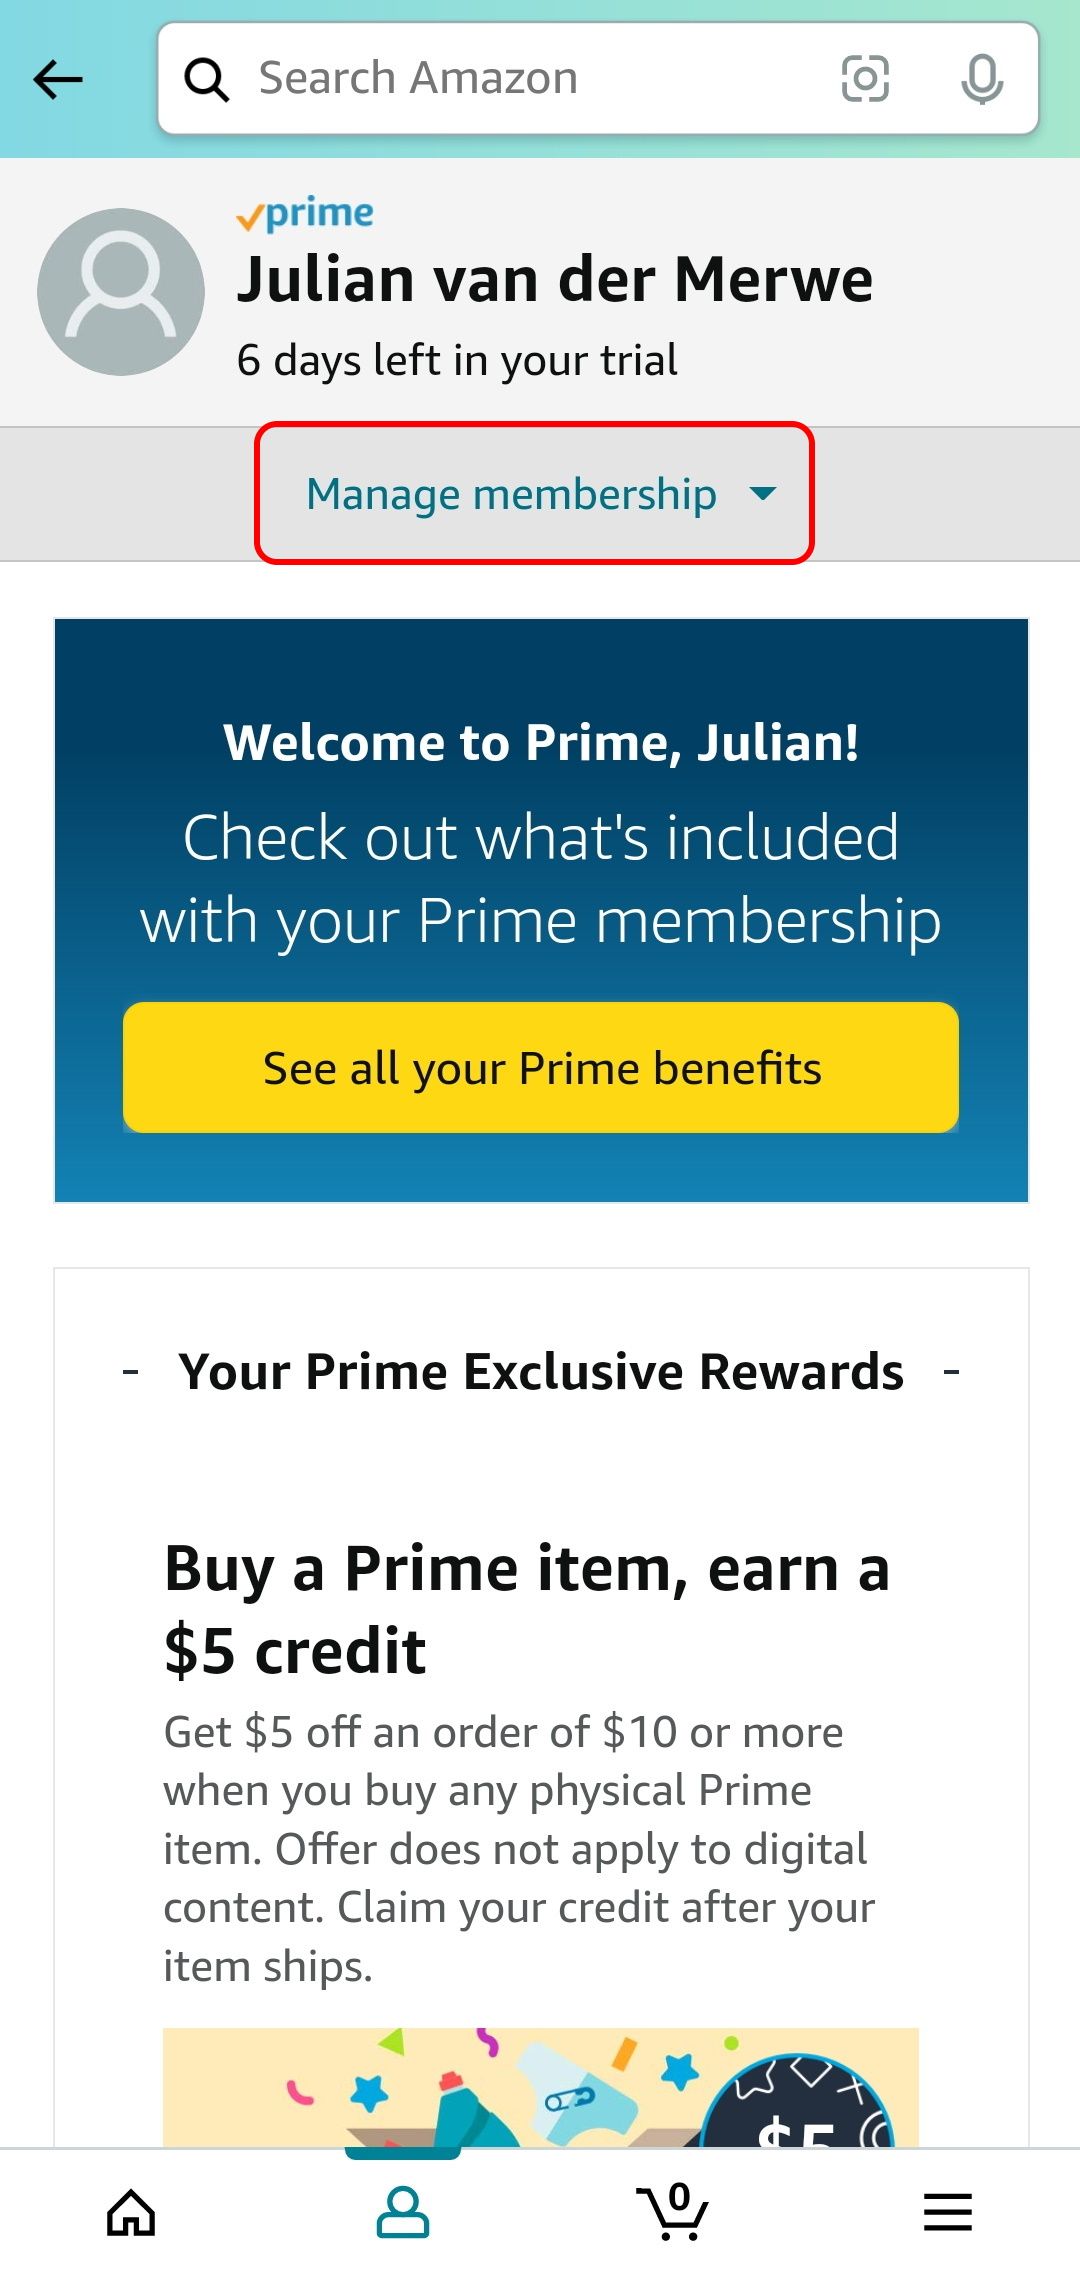 amazon shopping app manage prime membership page with manage membership button highlighted